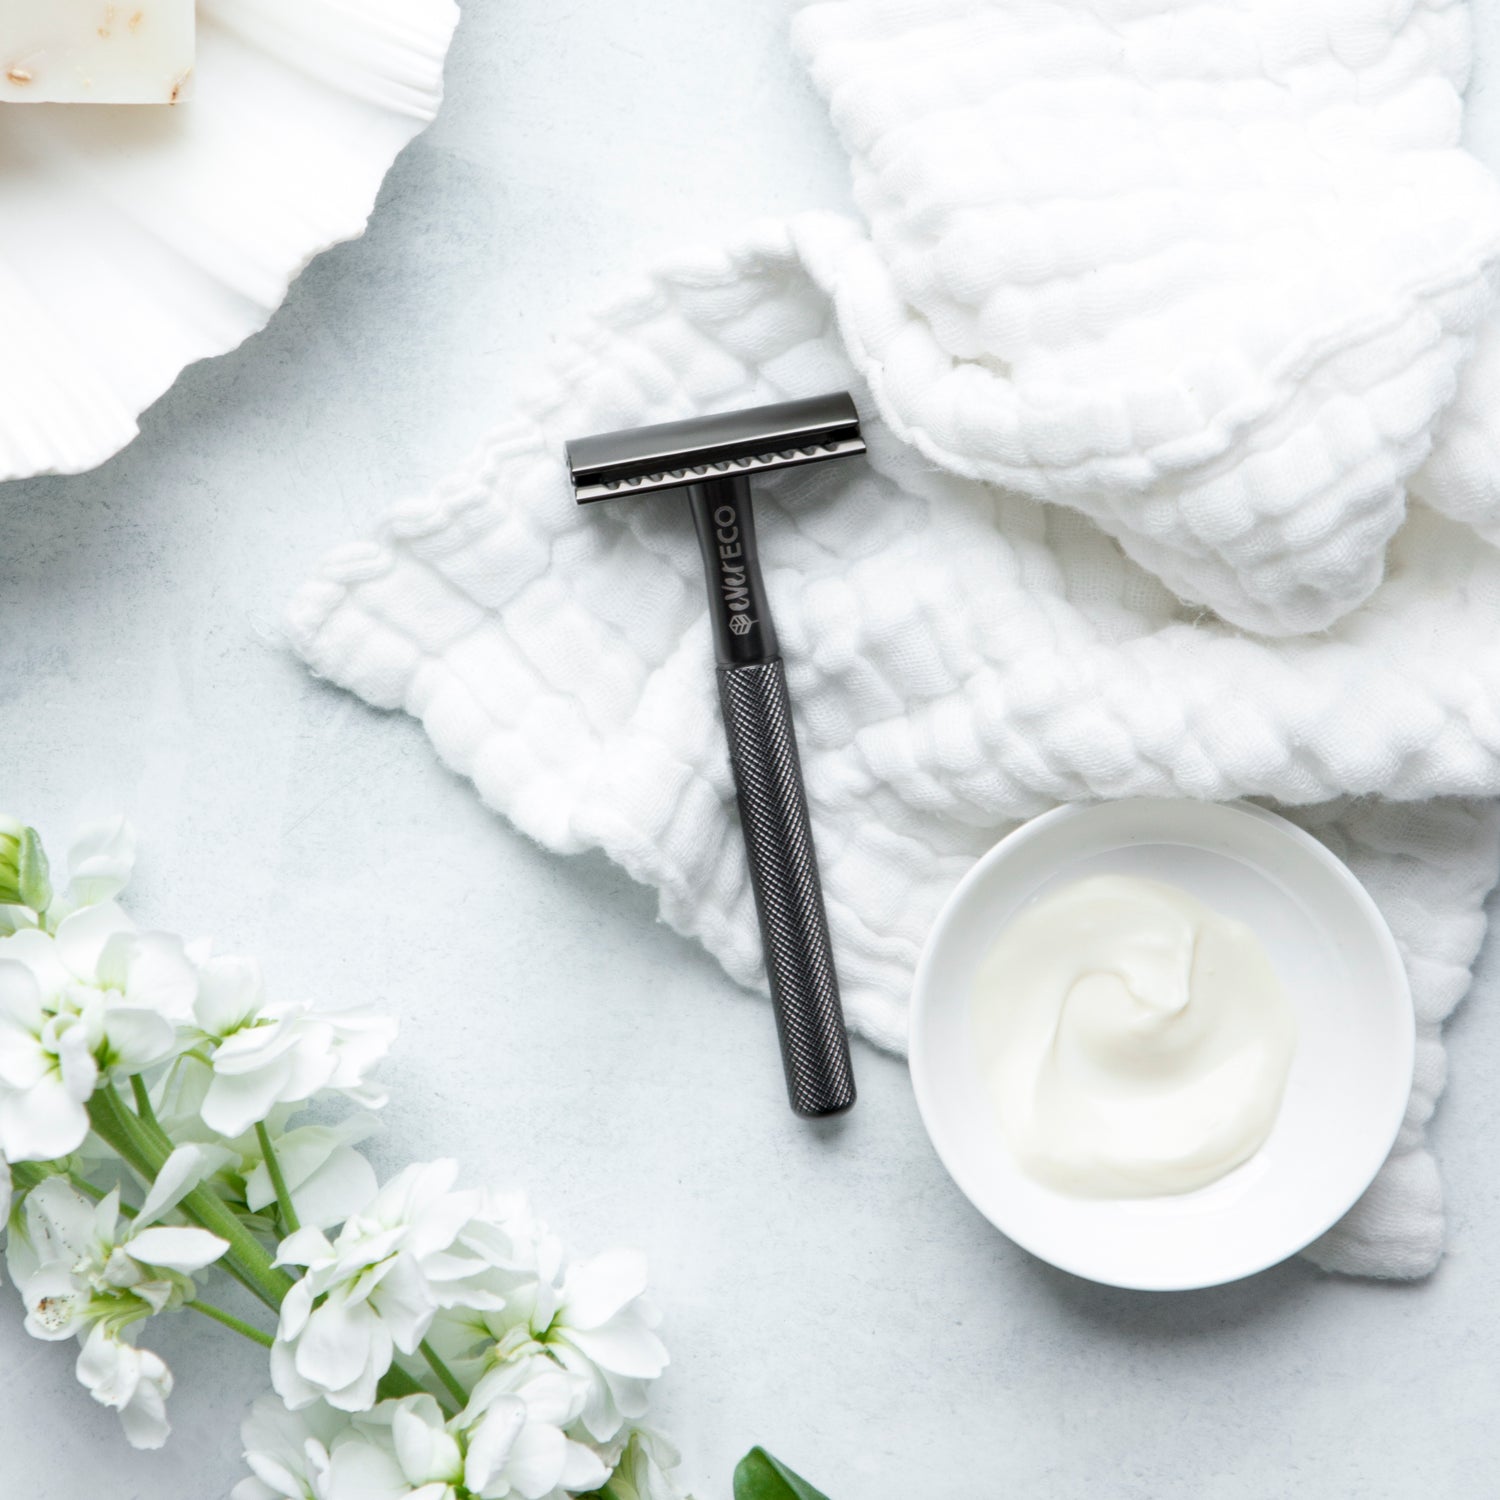 Ever Eco Safety Razor-The Living Co.